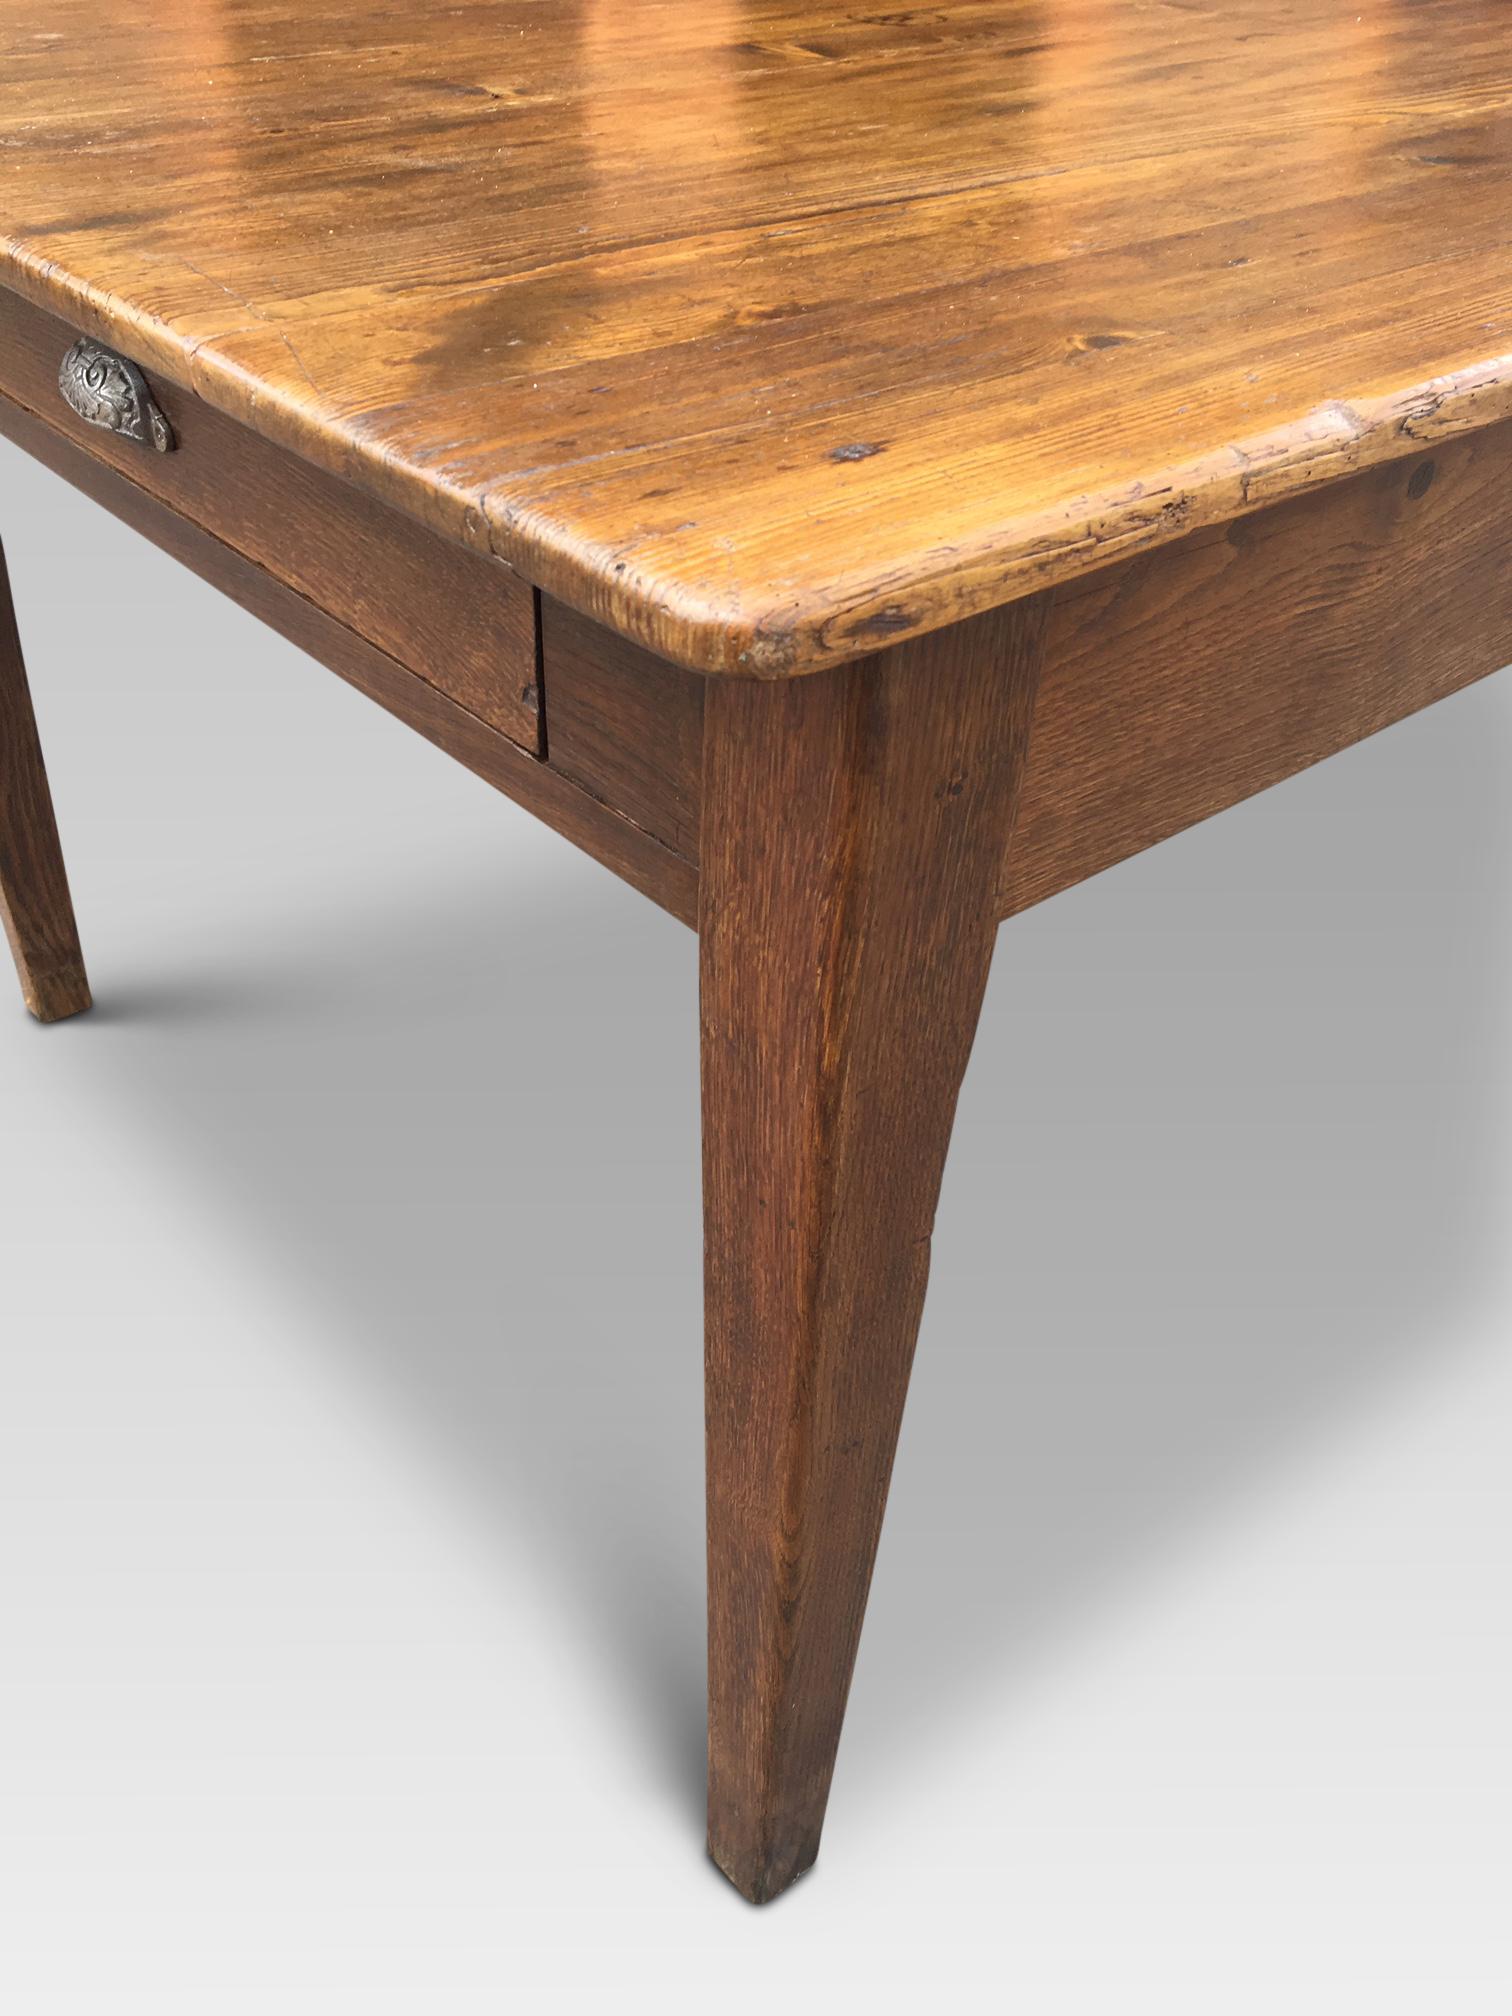 Country Farmhouse Table, French circa 1870. 110 ins